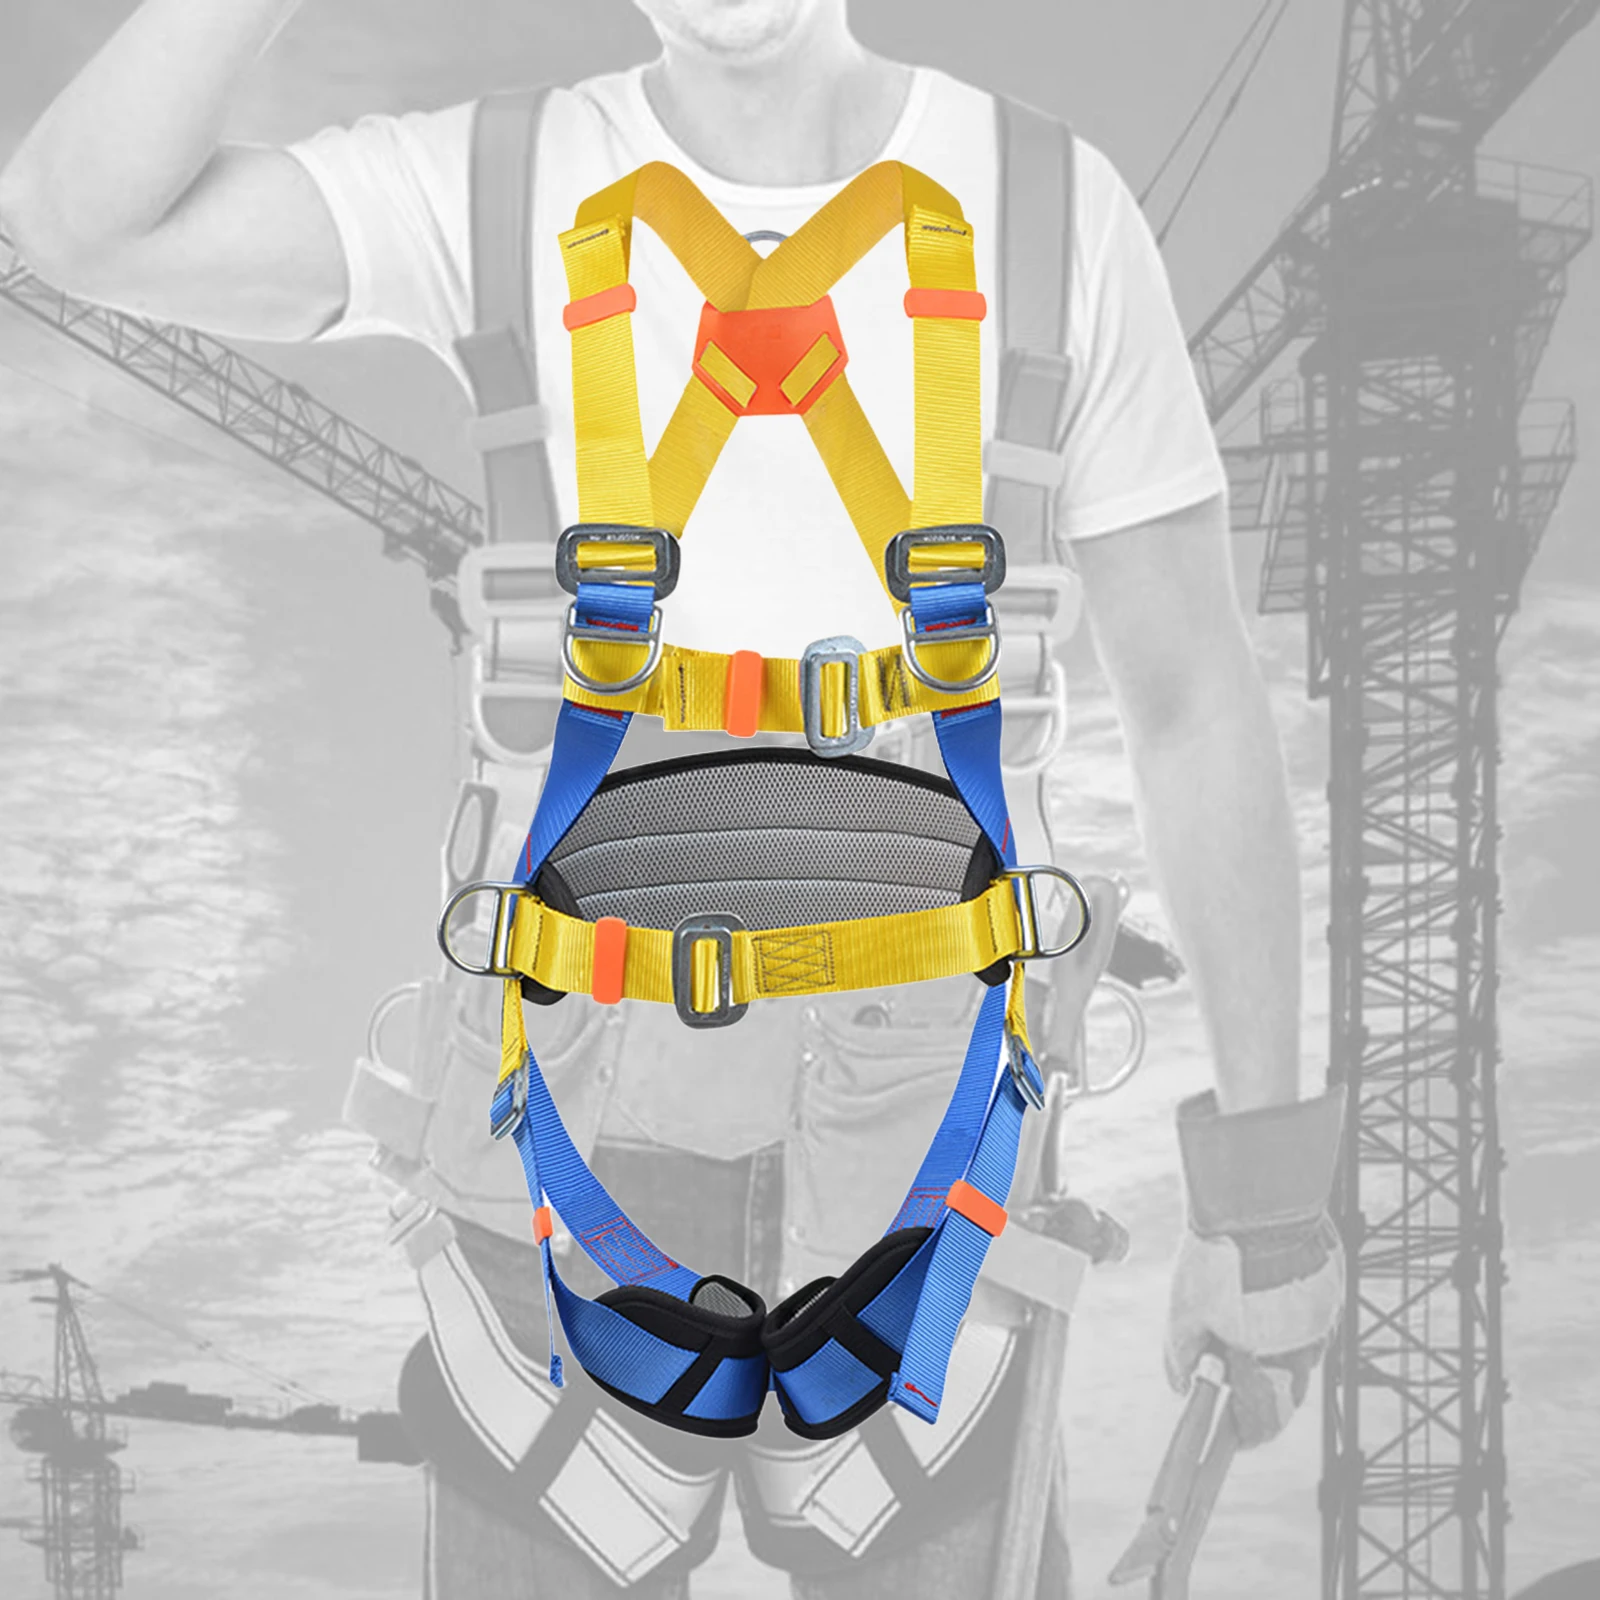 Professional Rock Climbing Harness Full Body Safety  Anti Fall Removable Gear Fall  Equipment Gear Tool  Teen